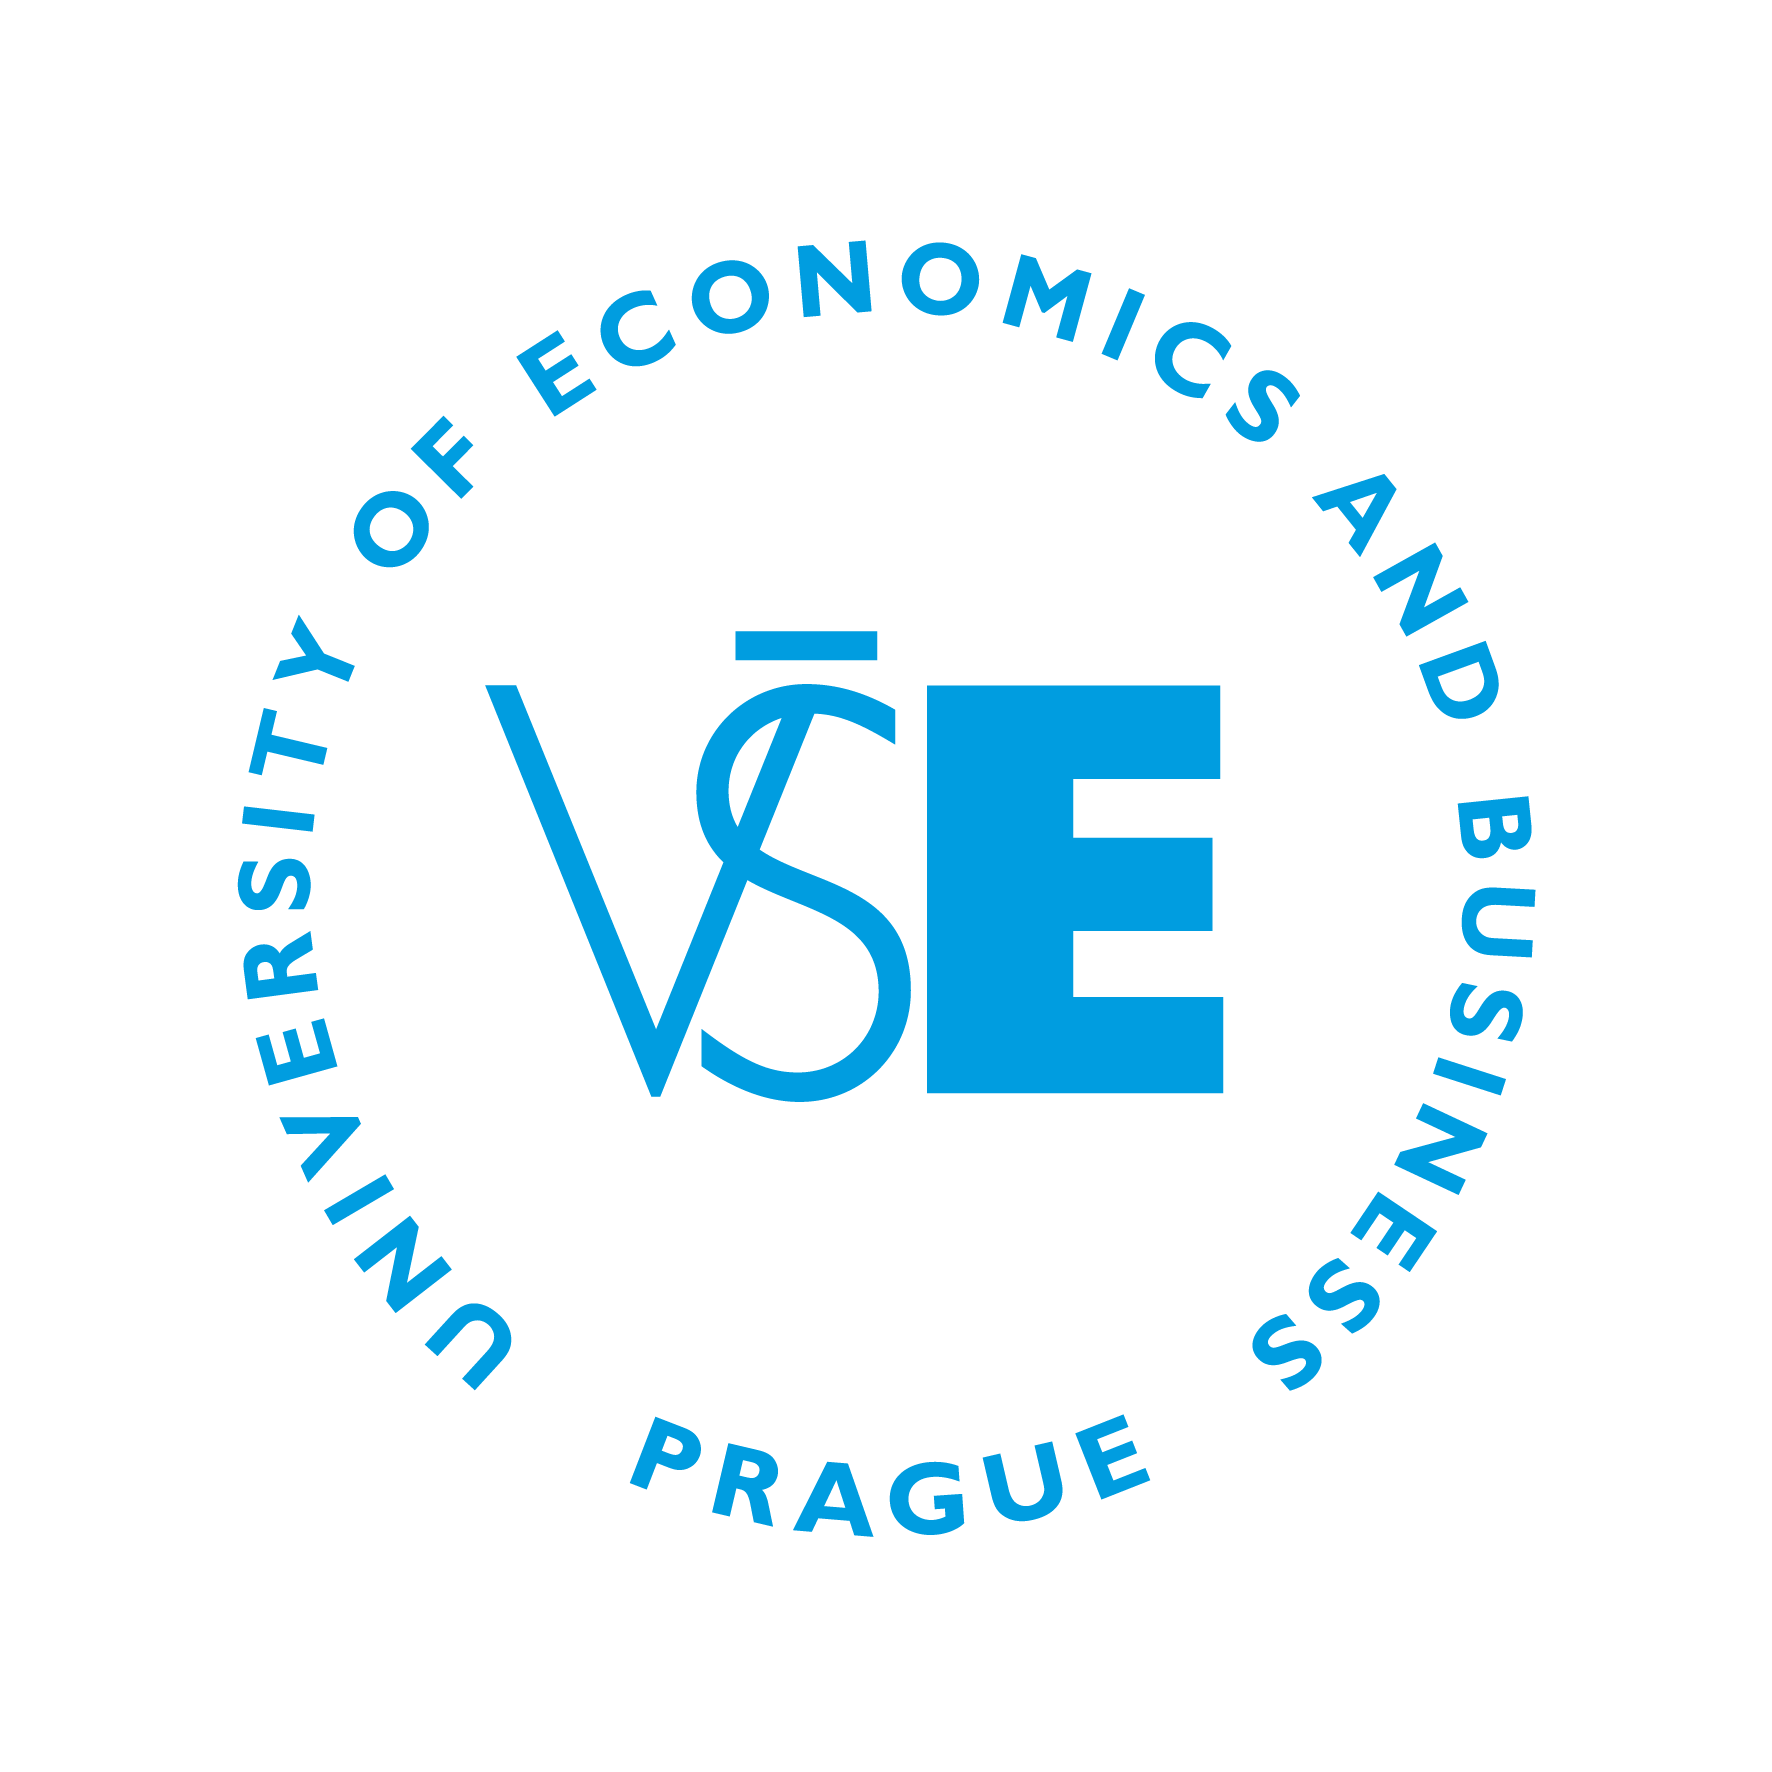 New brand name of VŠE in English is Prague University of Economics and Business